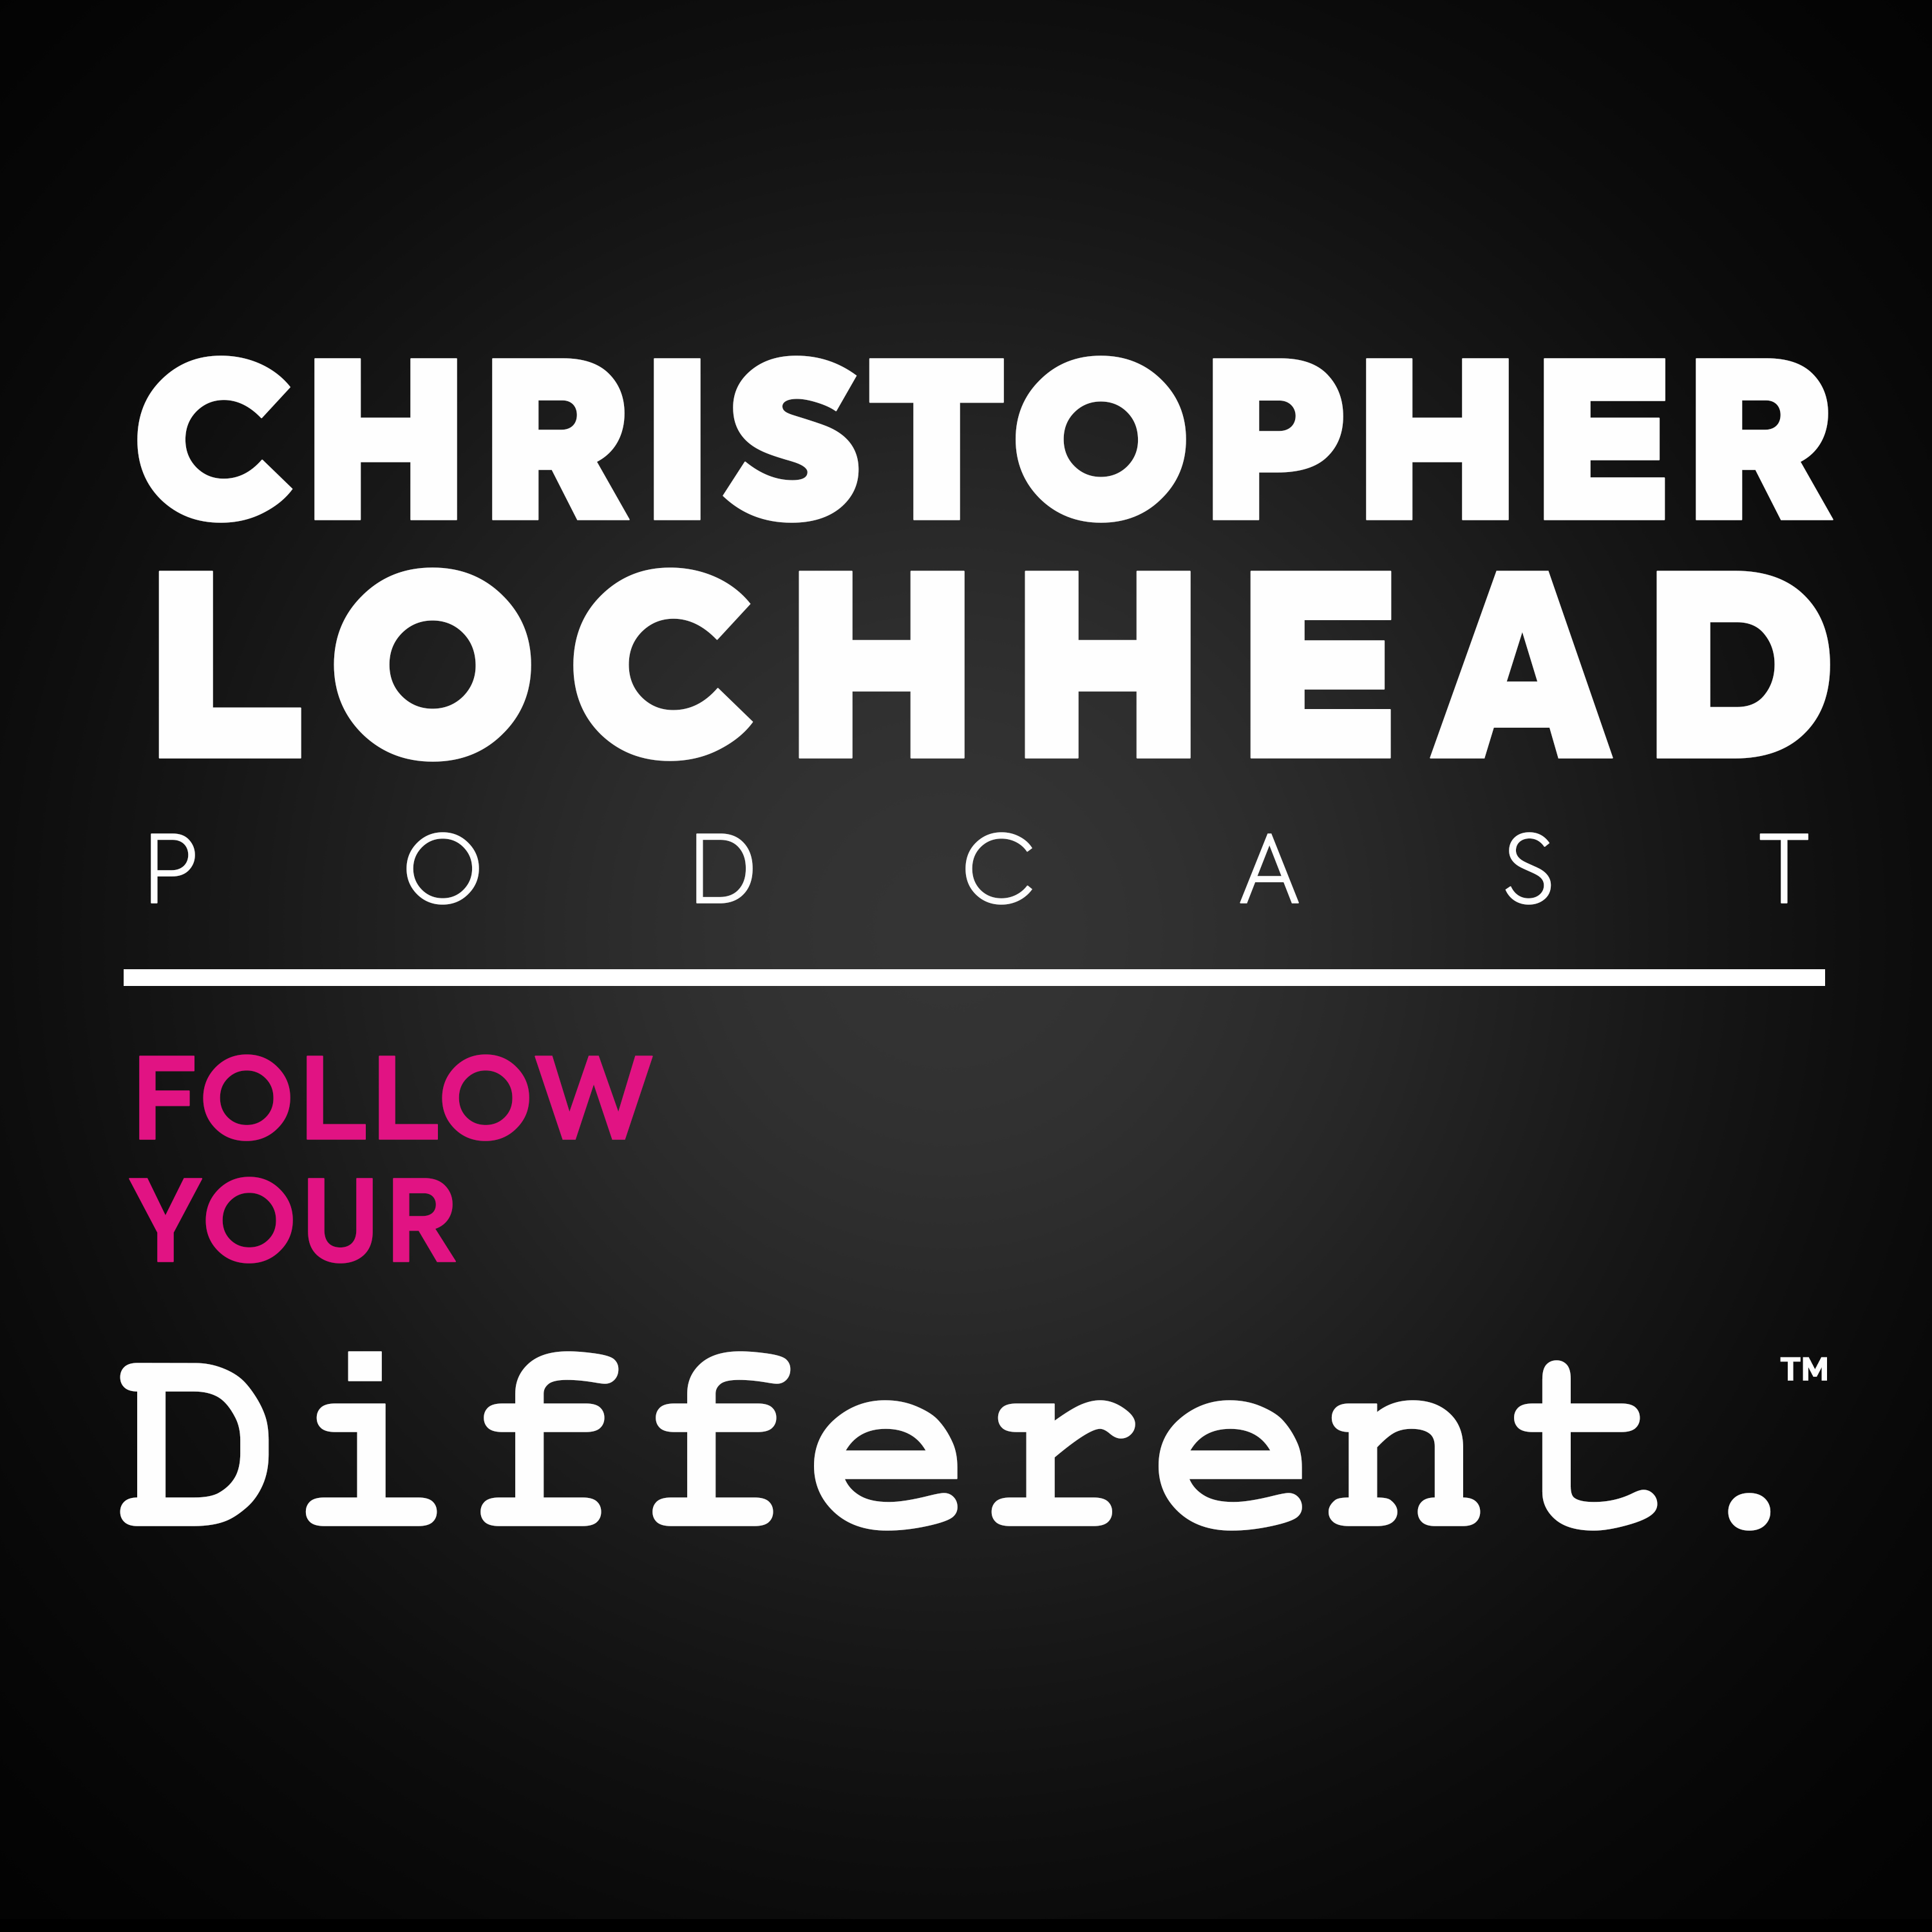 Christopher Lochhead Follow Your Different